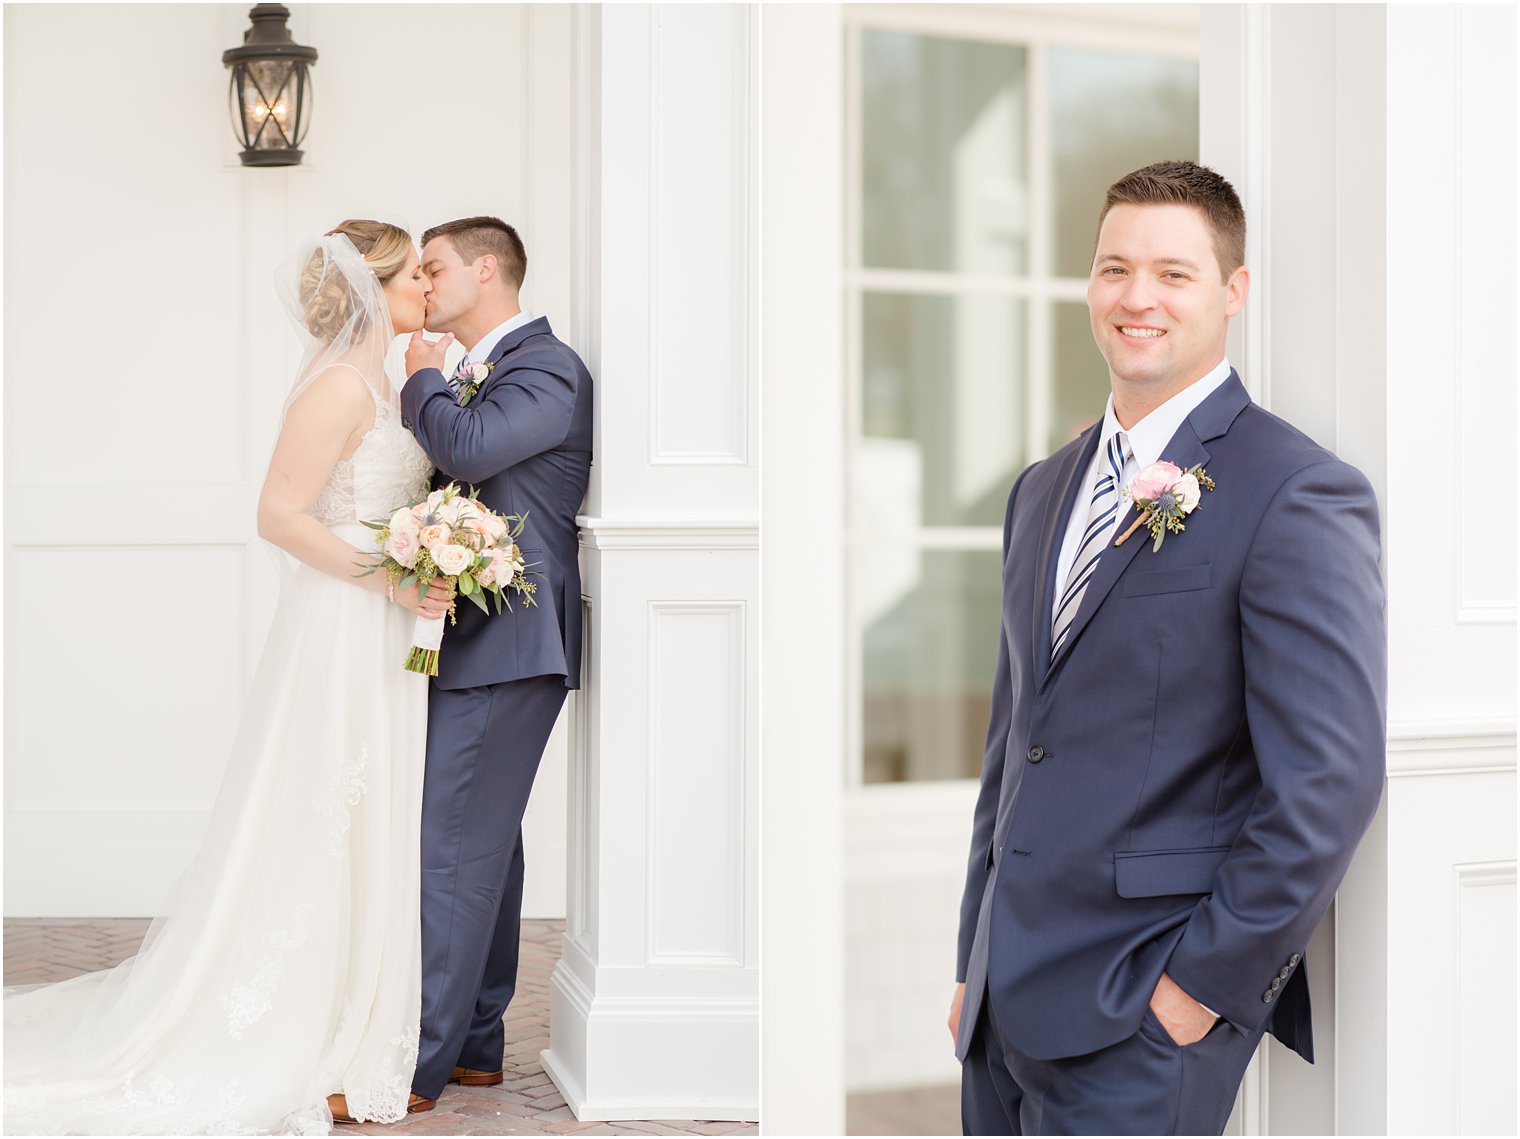 Wedding portraits at The Mill Lakeside Manor